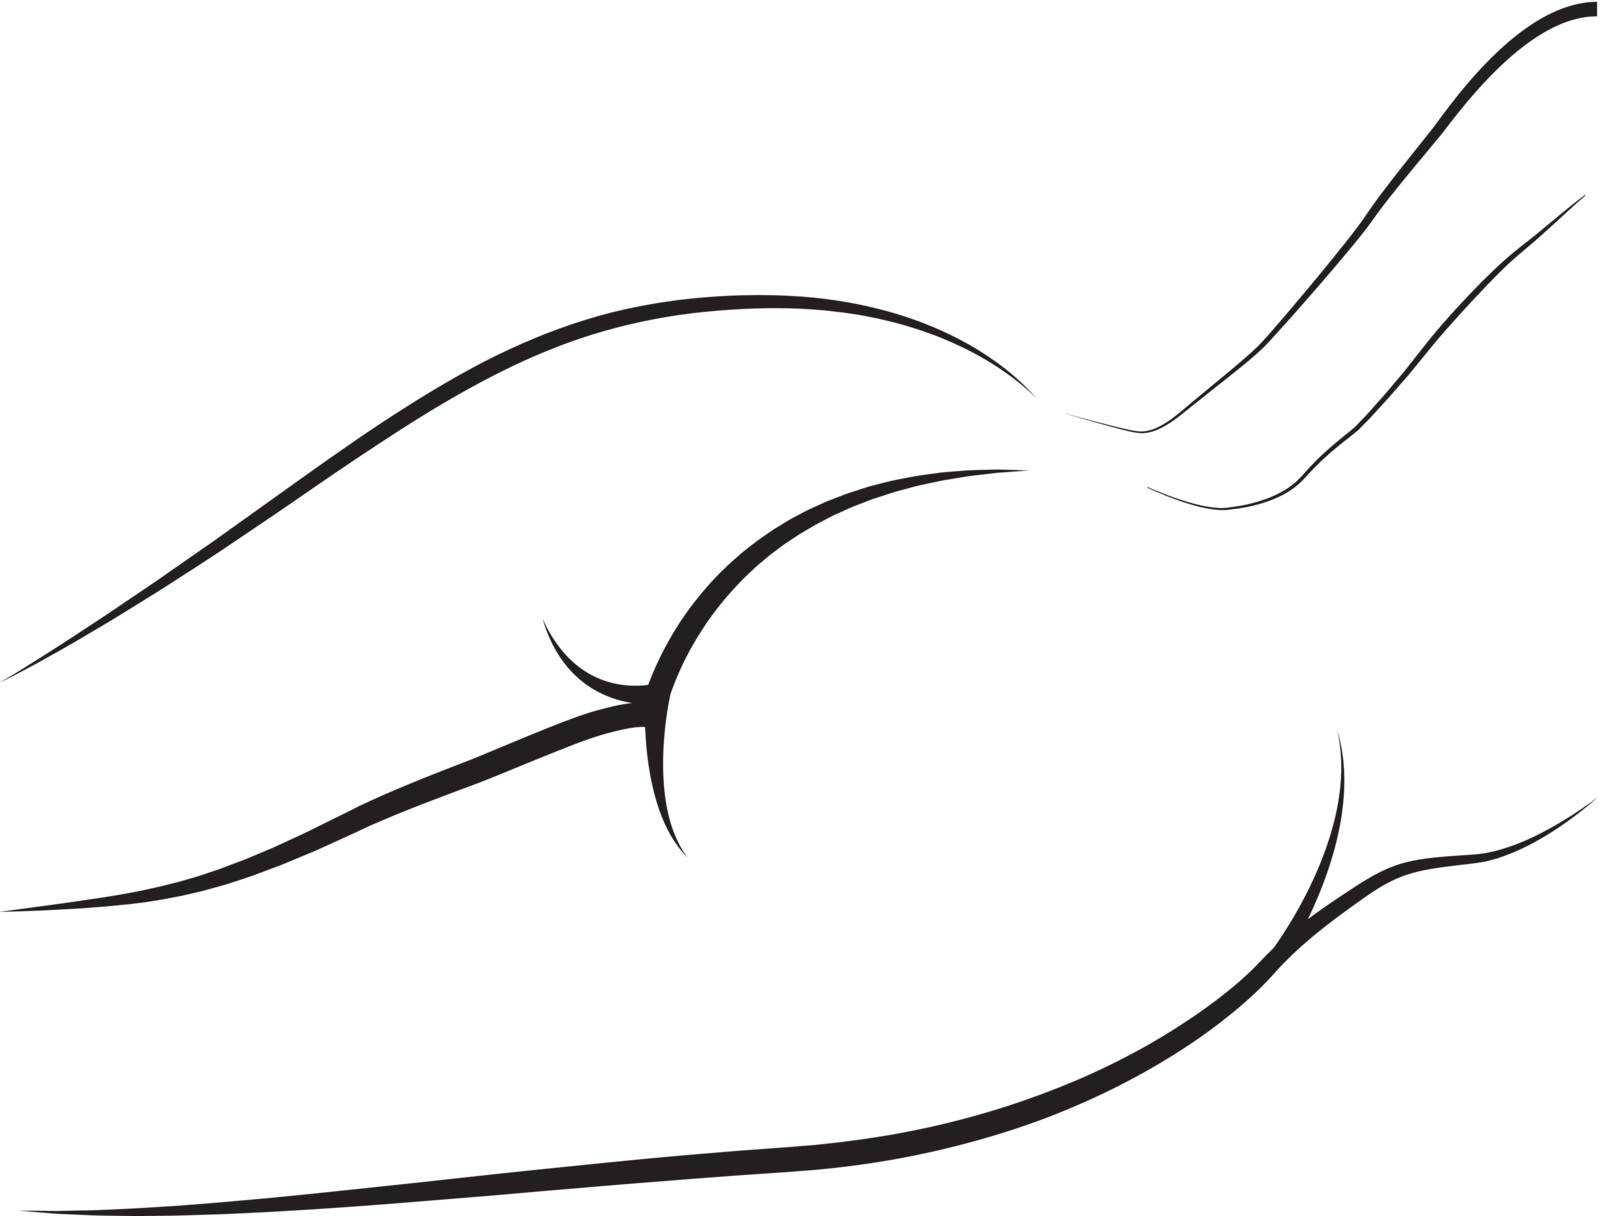 Female nude buttocks vector outline by only4denn